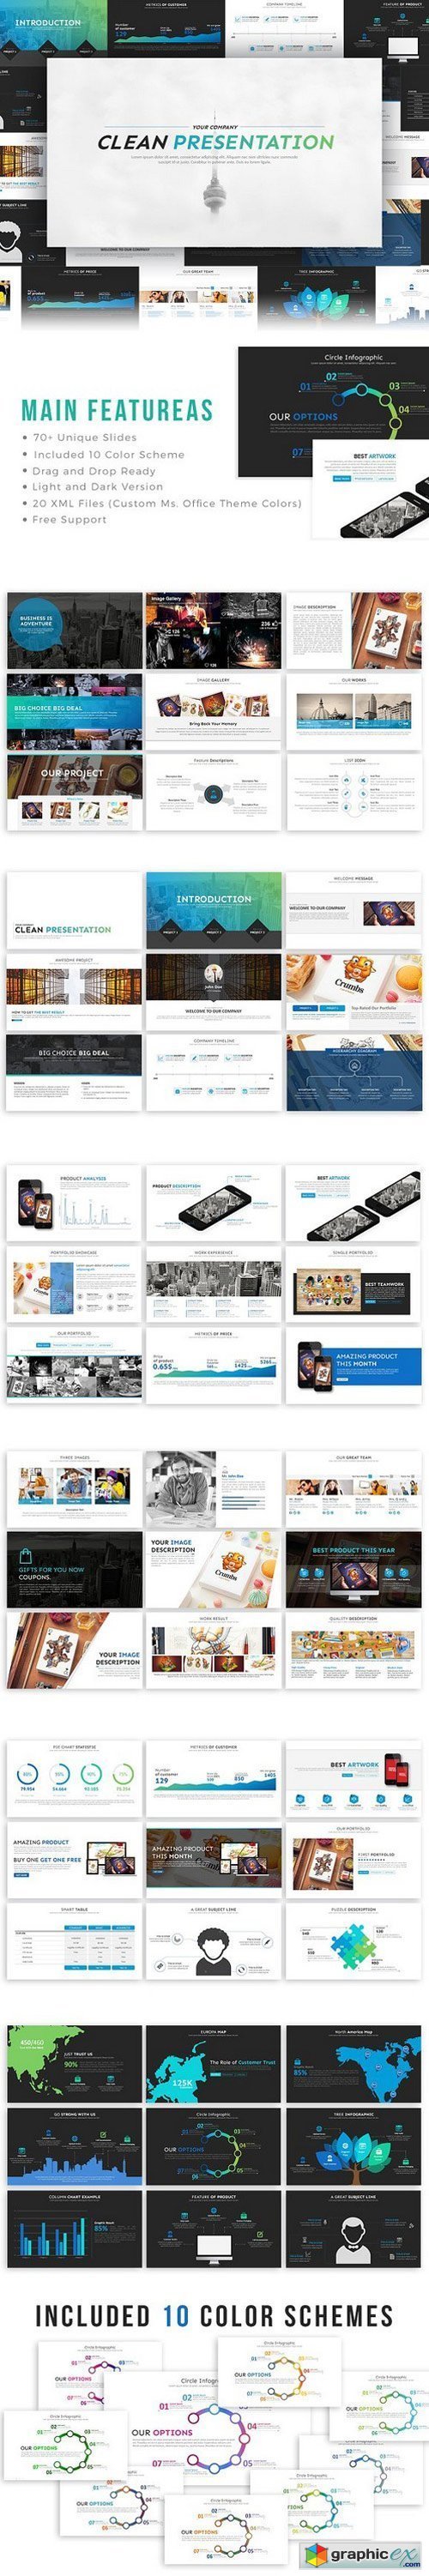 Clean PowerPoint Template 996842